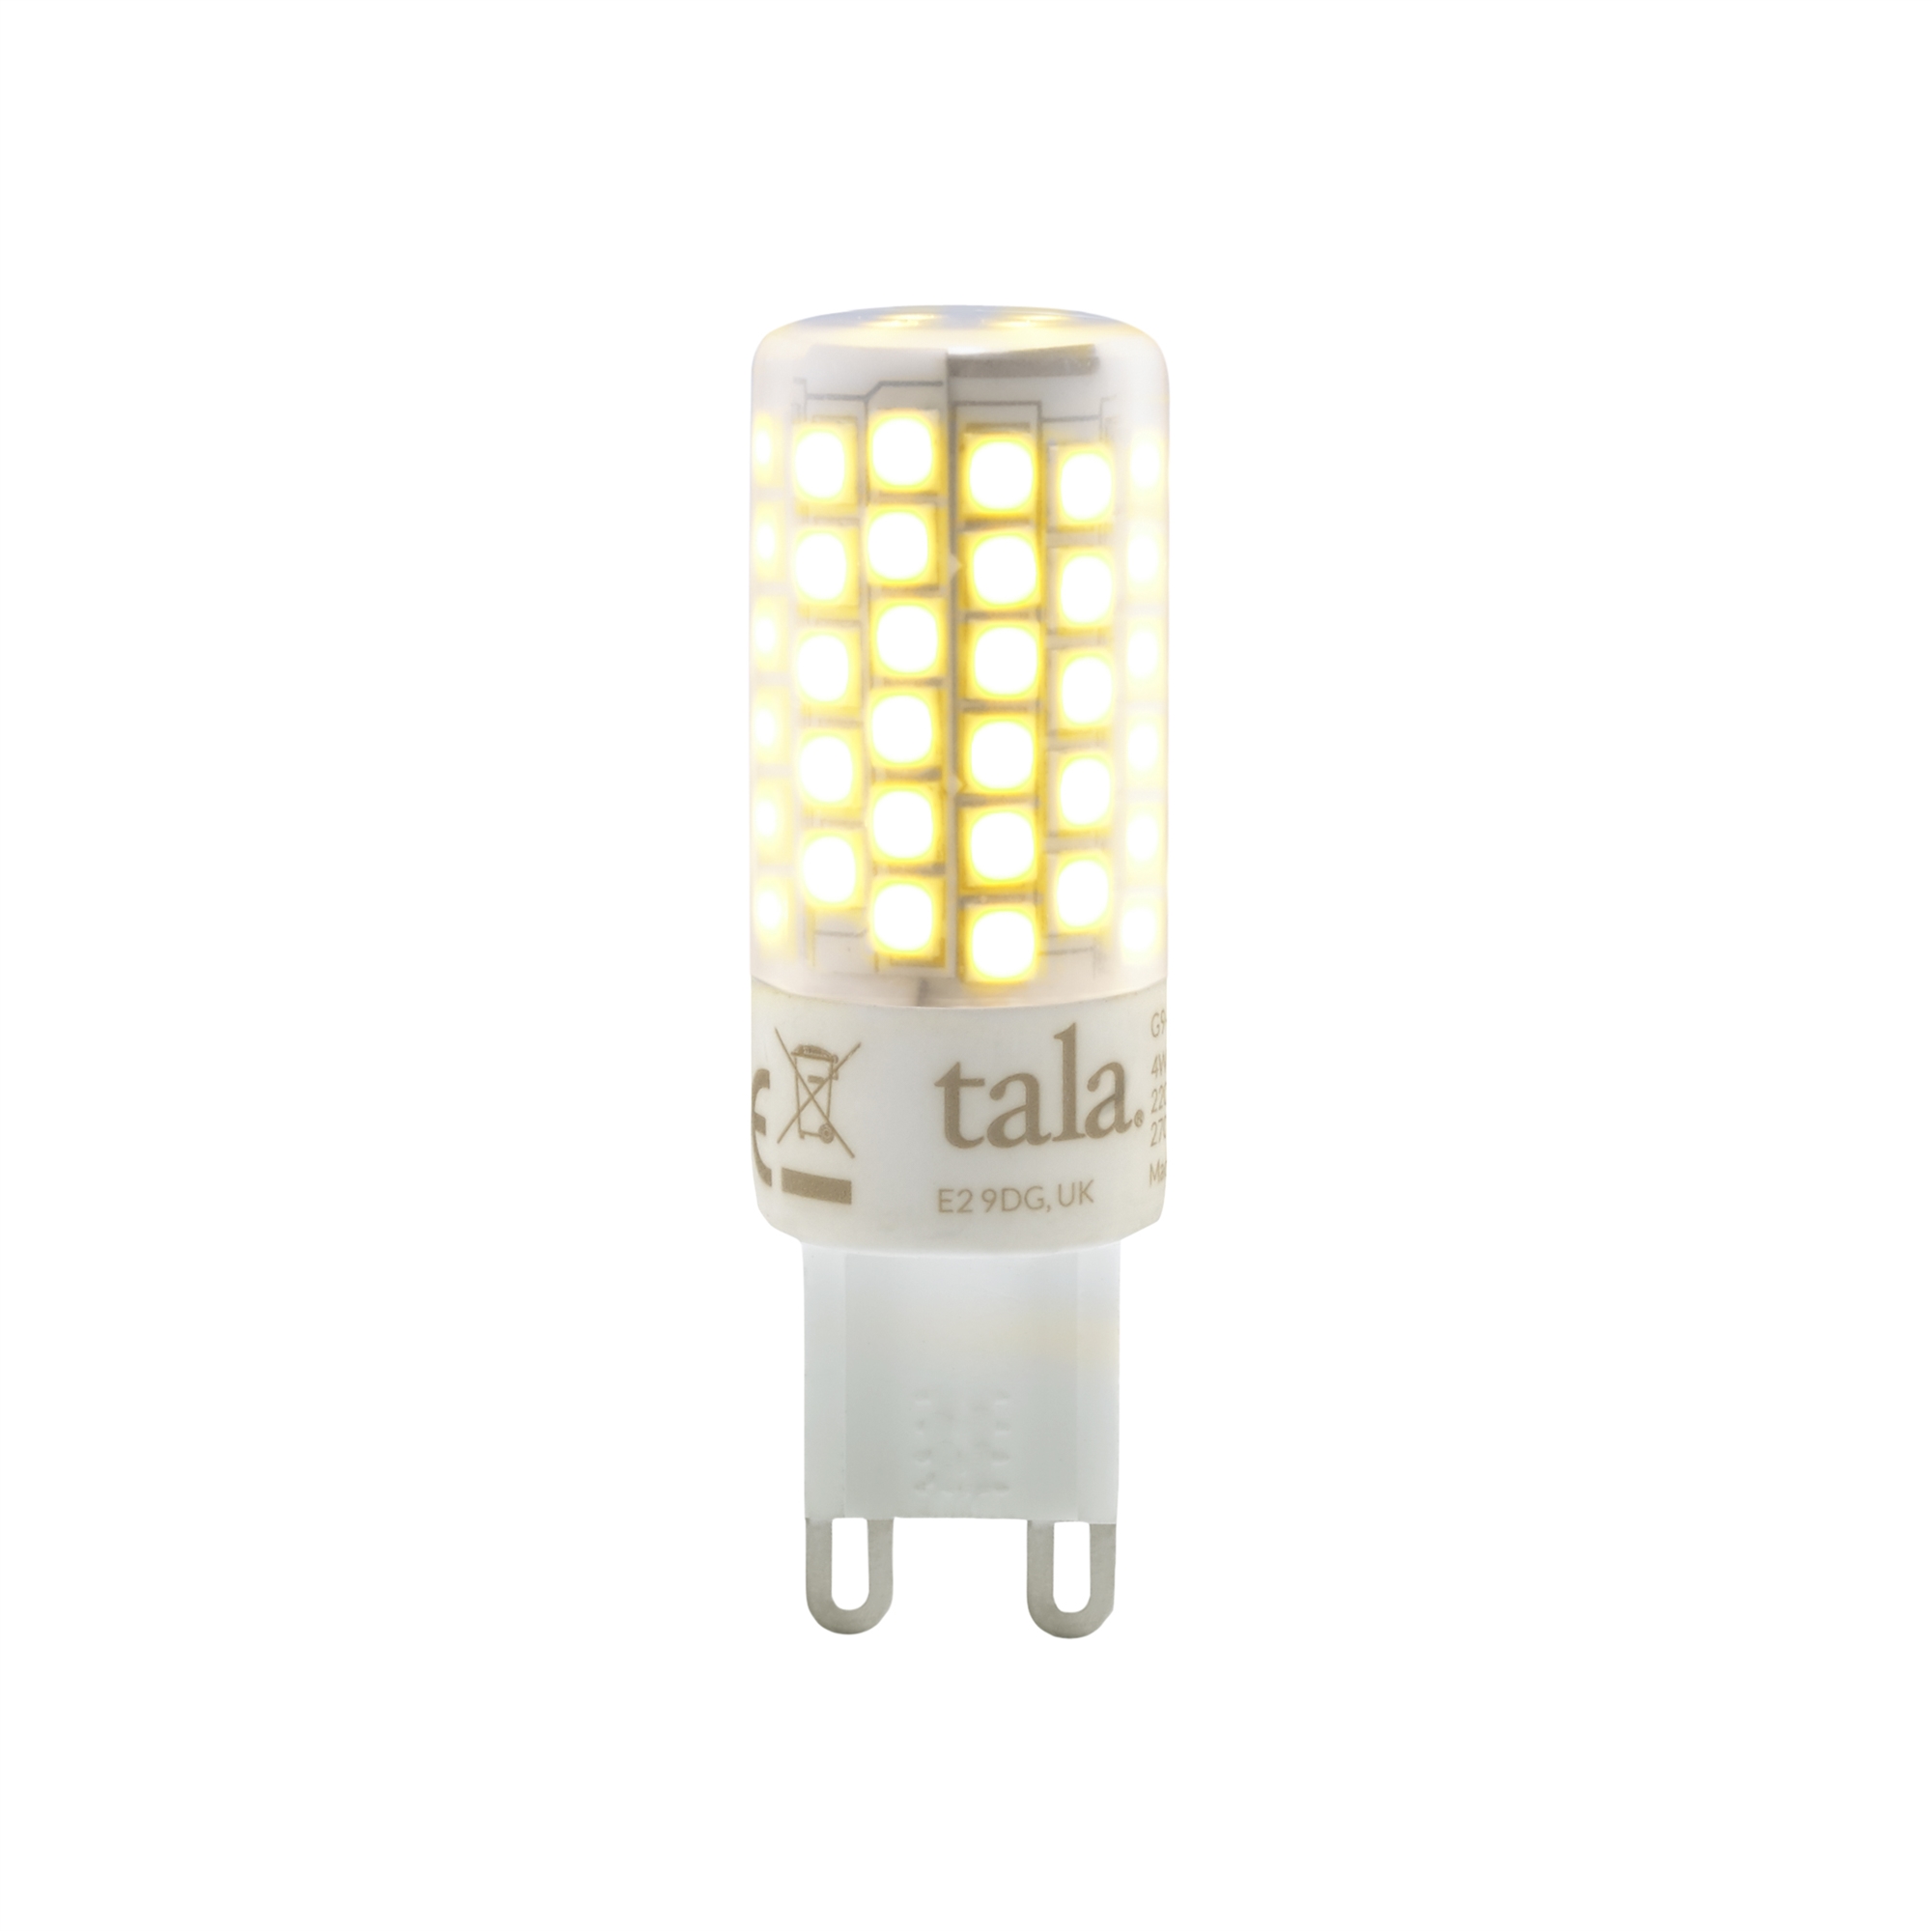 Tala G9 3.6W LED 2700K Frosted | AndLight